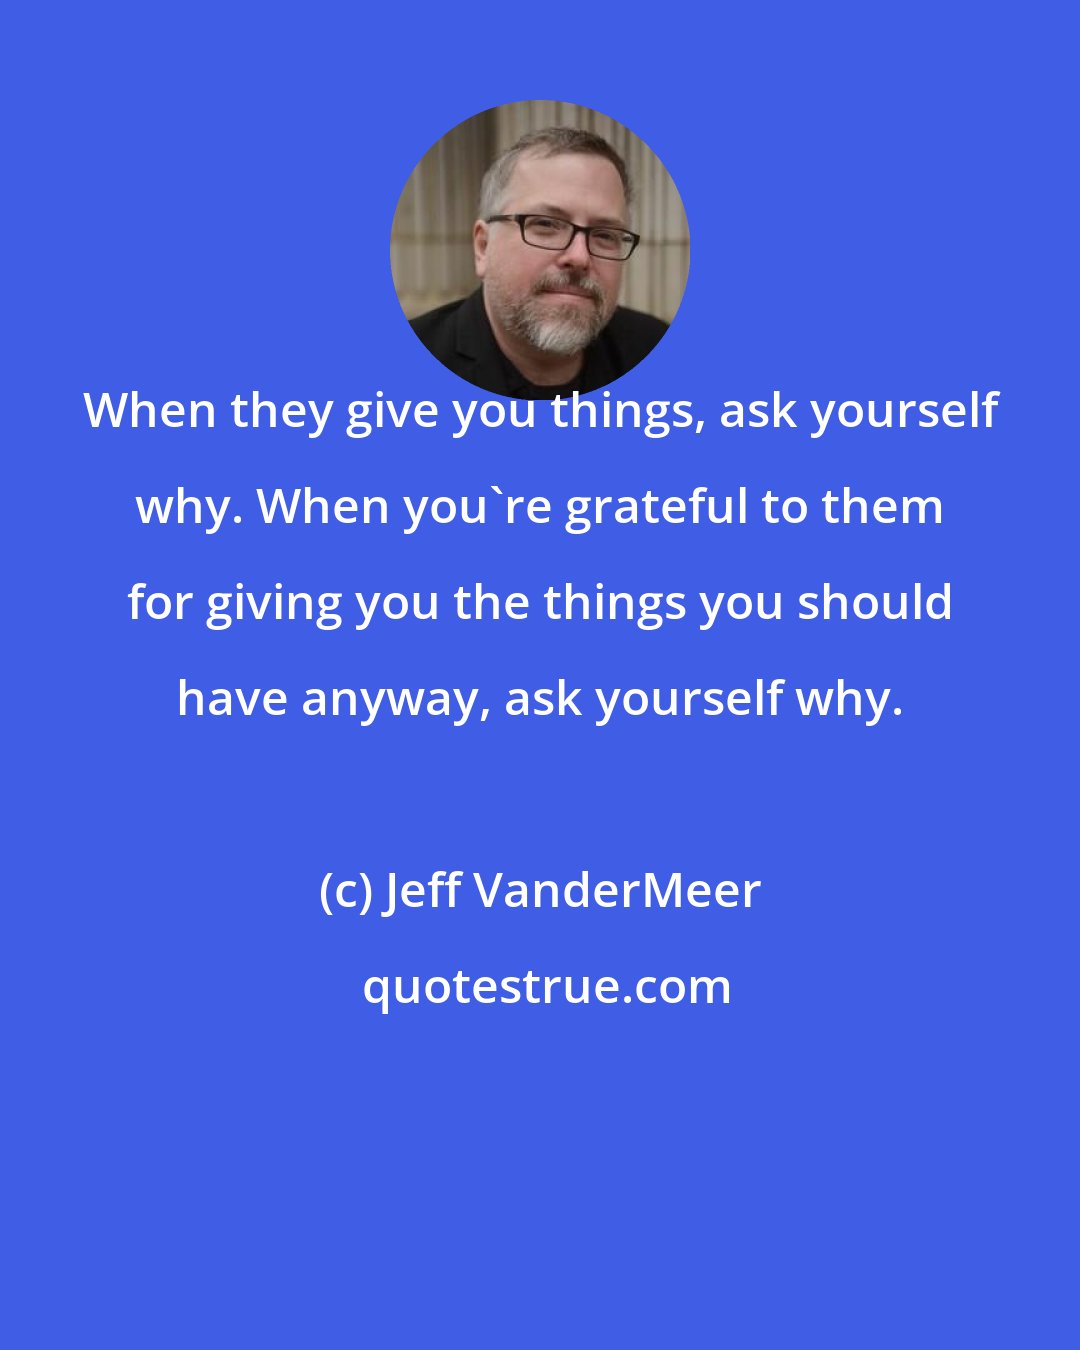 Jeff VanderMeer: When they give you things, ask yourself why. When you're grateful to them for giving you the things you should have anyway, ask yourself why.